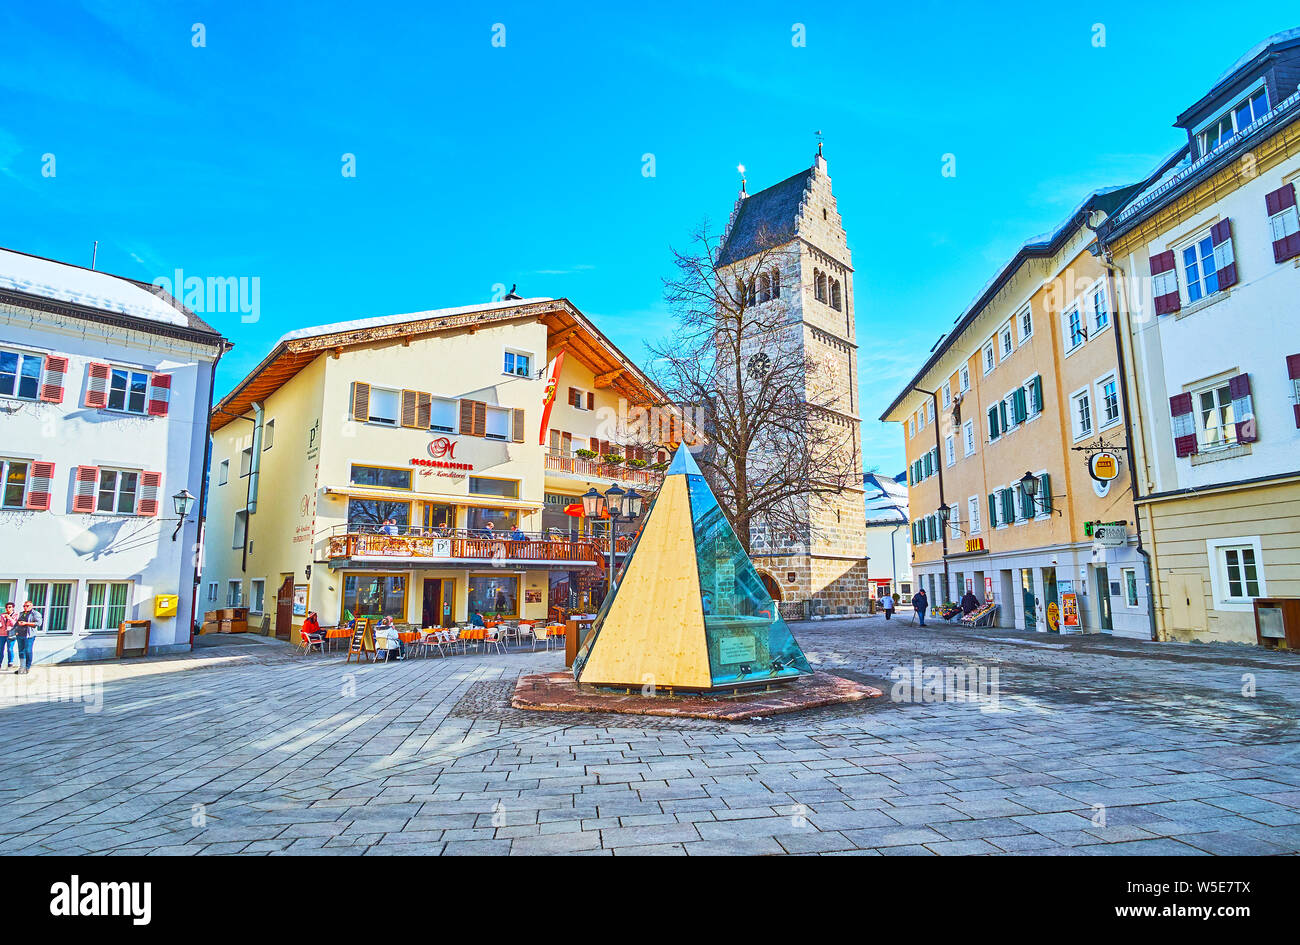 ZELL AM SEE, AUSTRIA - FEBRUARY 28, 2019: The central city square, named Stadtplatz, with traditional buildings and medieval stone bell tower of Paris Stock Photo